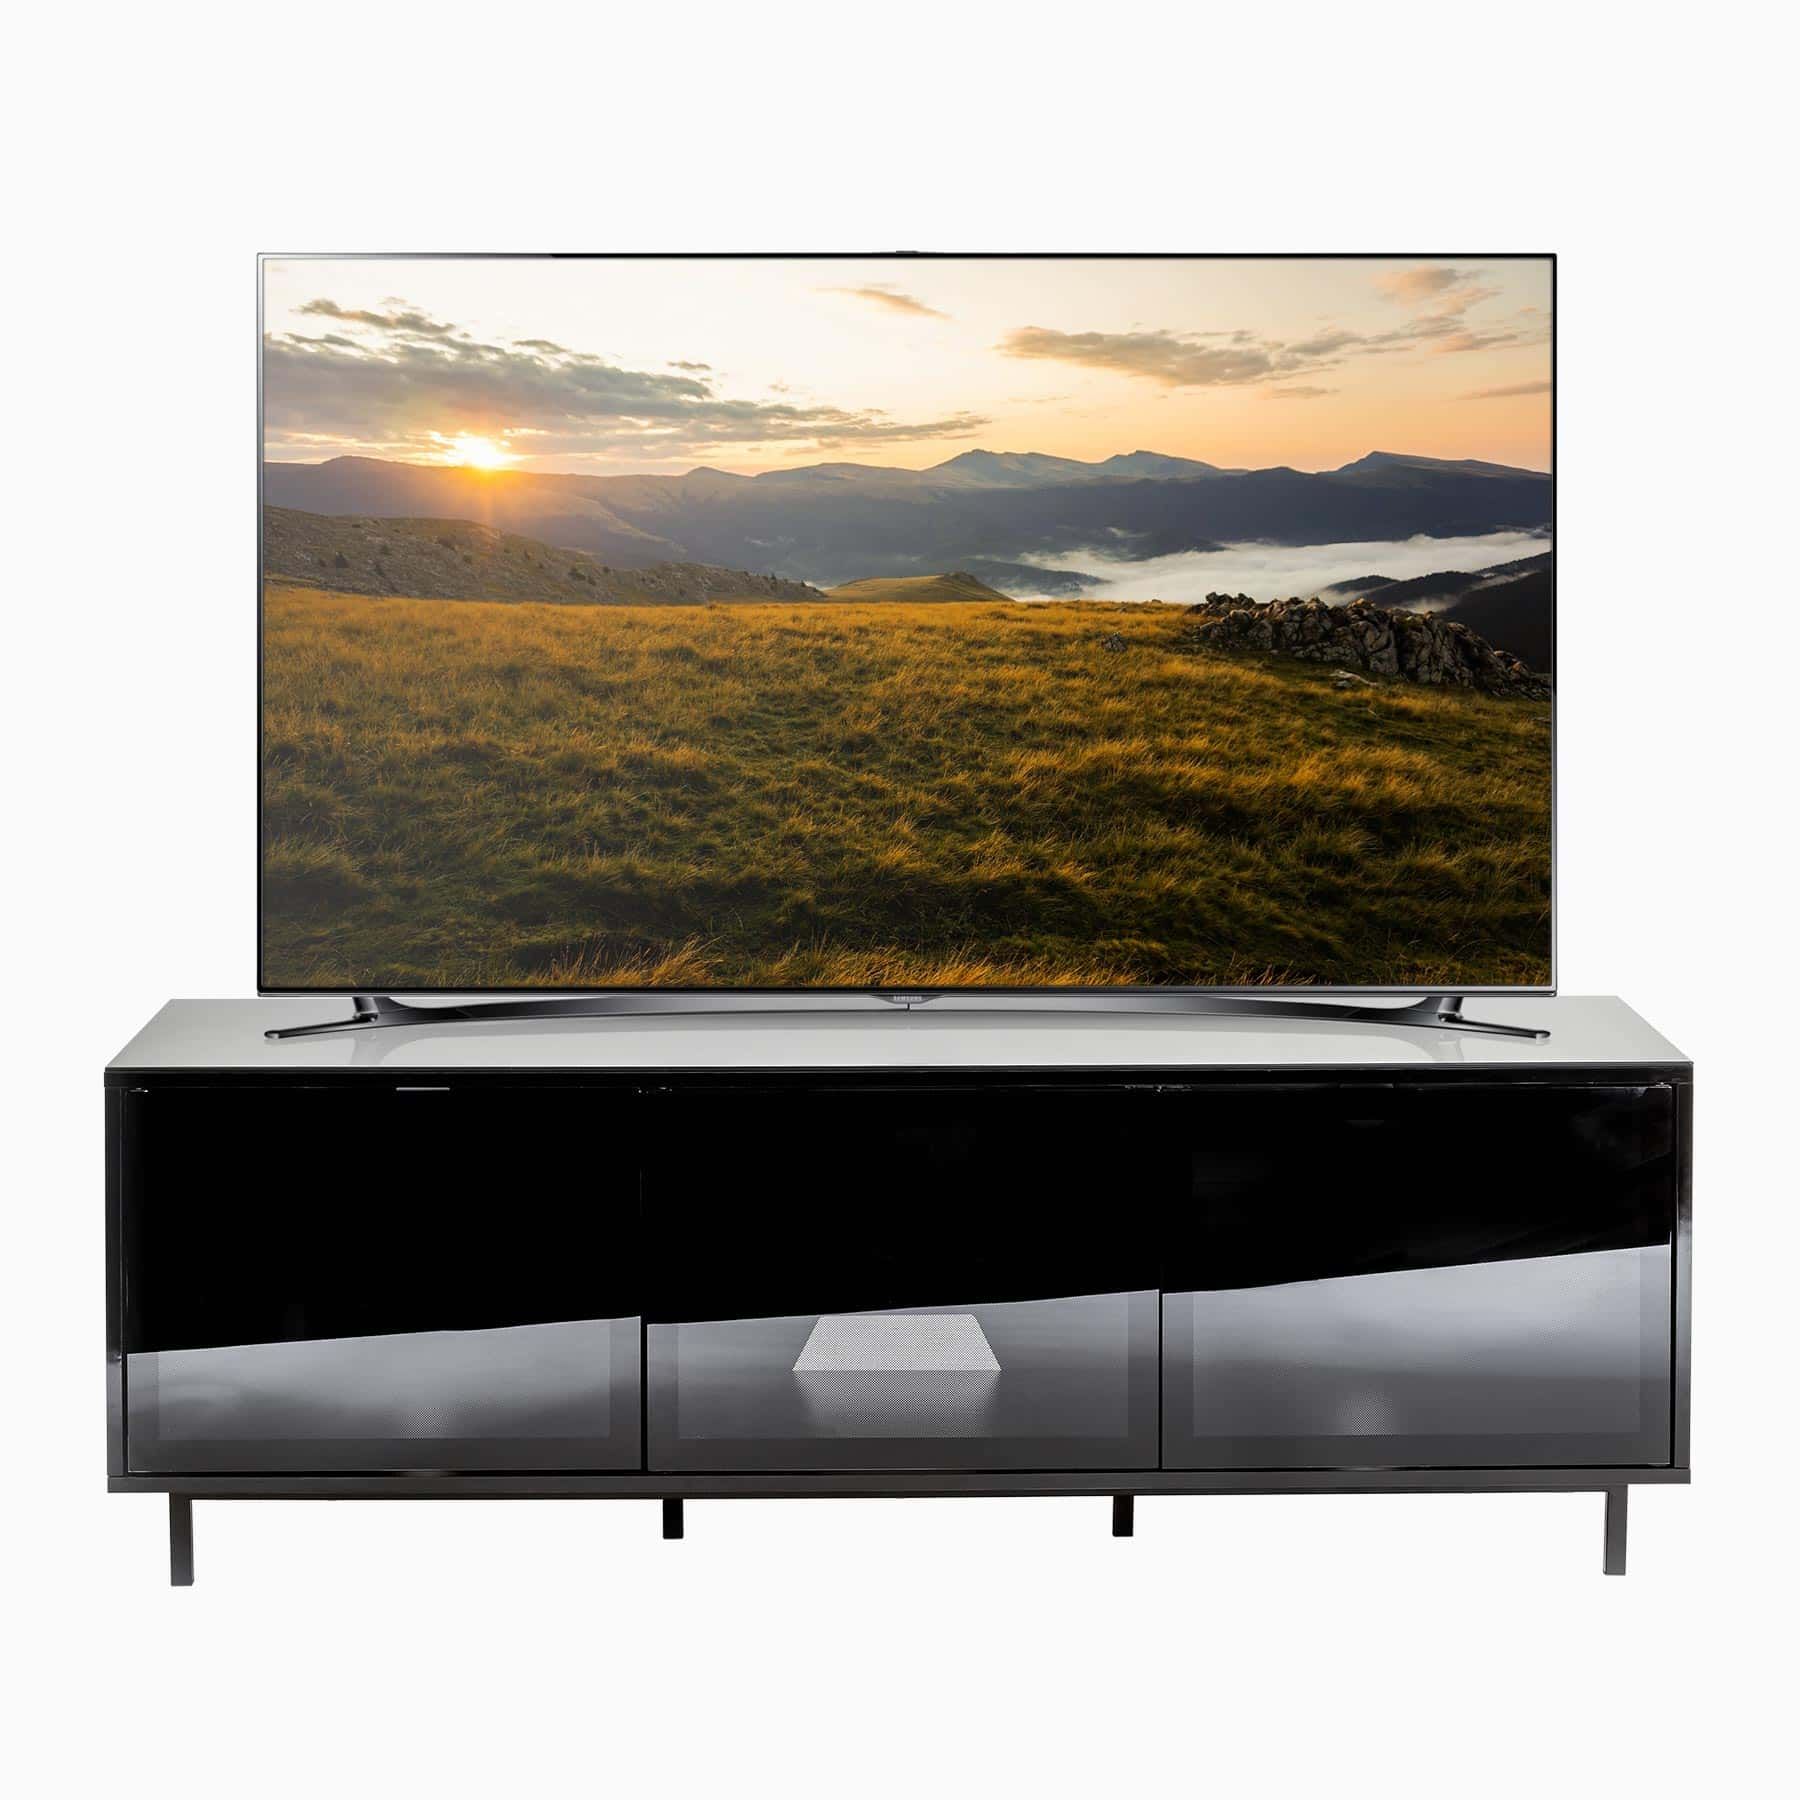 Black Gloss Tv Cabinet With Doors | Mmt Tdsetvc 1500blk With Regard To Tv Cabinet Gloss (View 14 of 15)